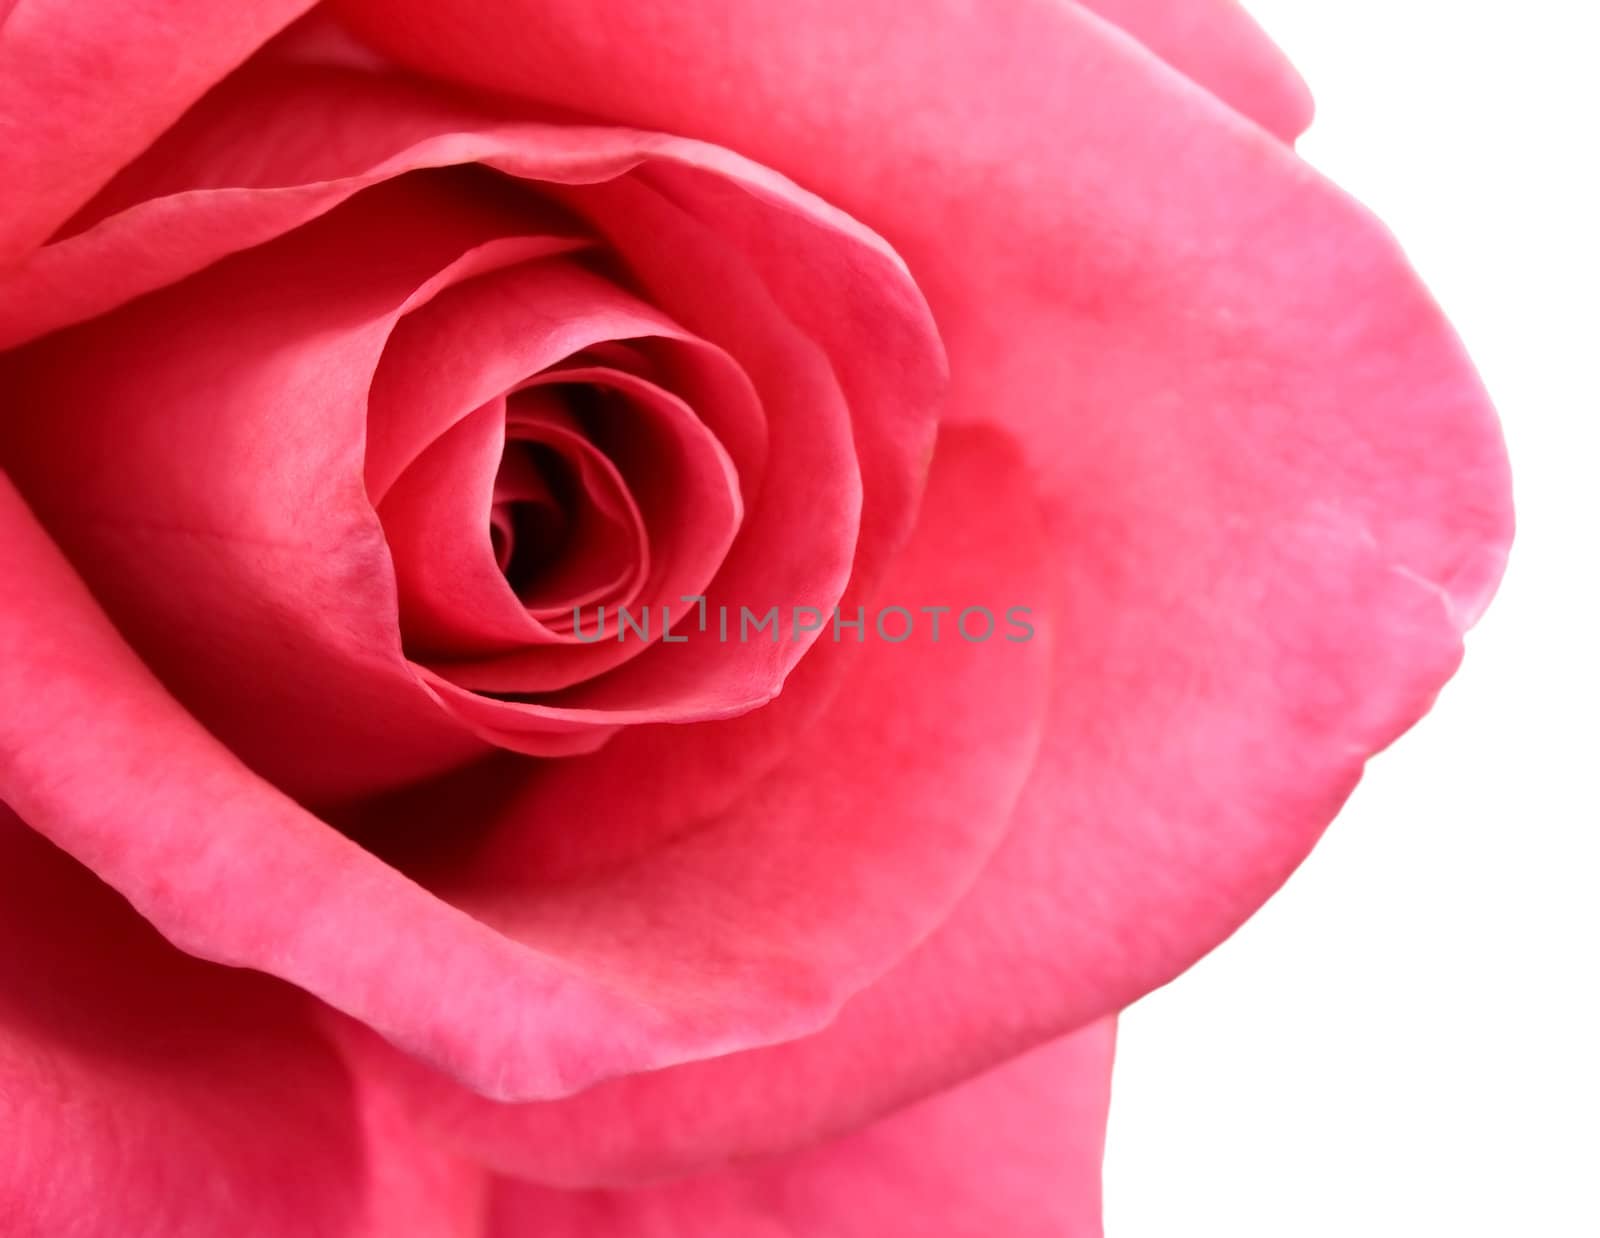 red rose flower close-up on white background by sherj